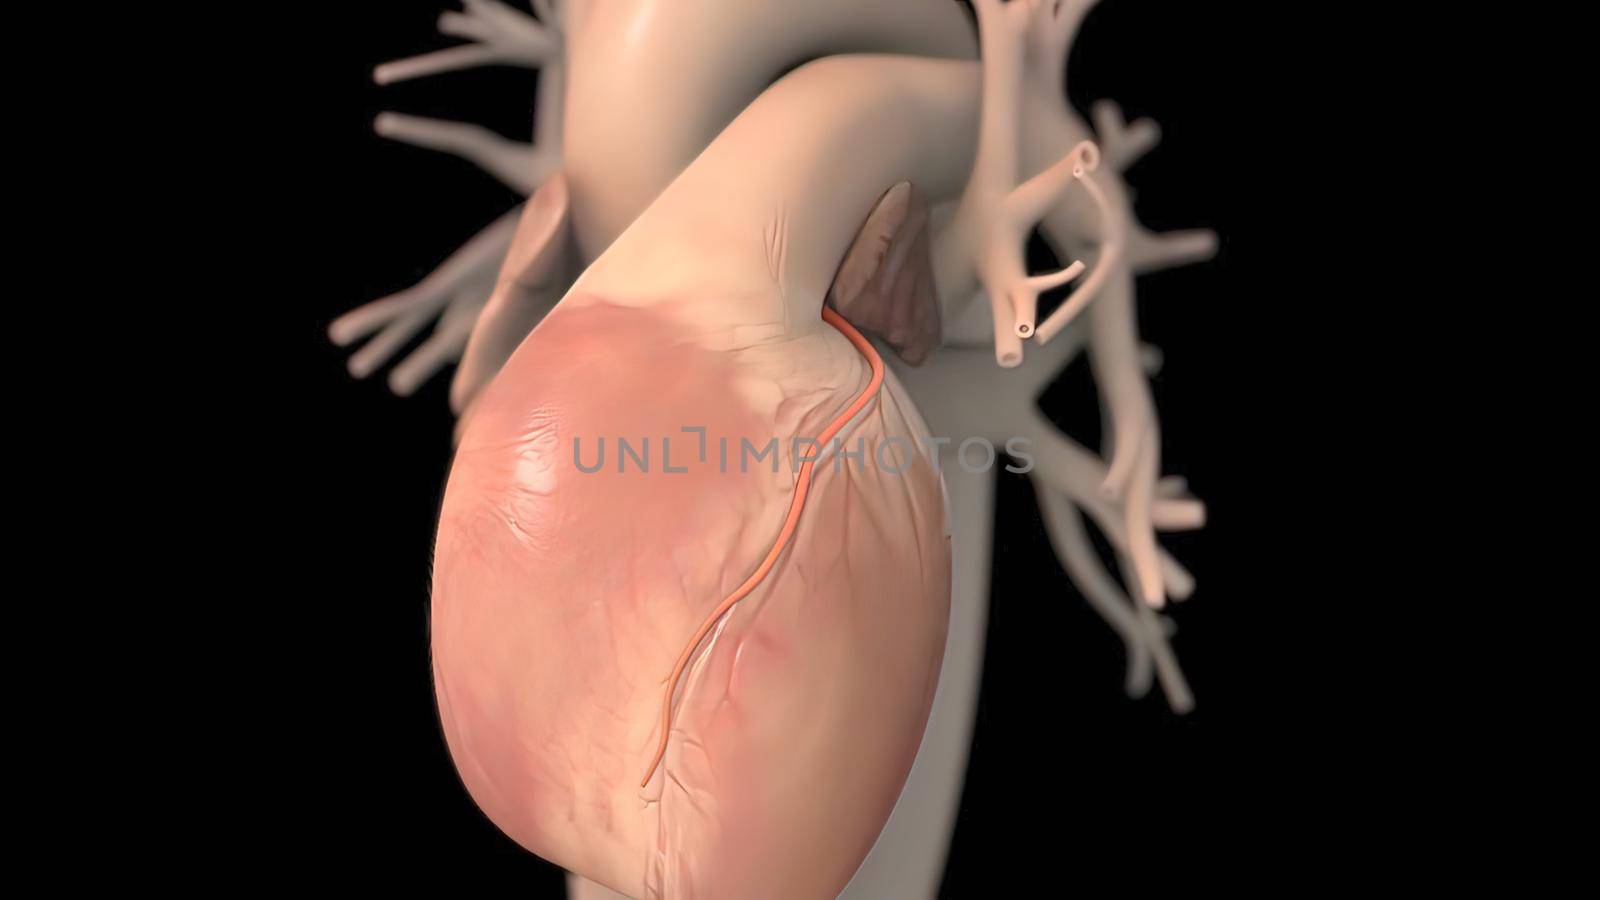 Human heart, realistic anatomy 3d model of human heart on the monitor, visual he by creativepic